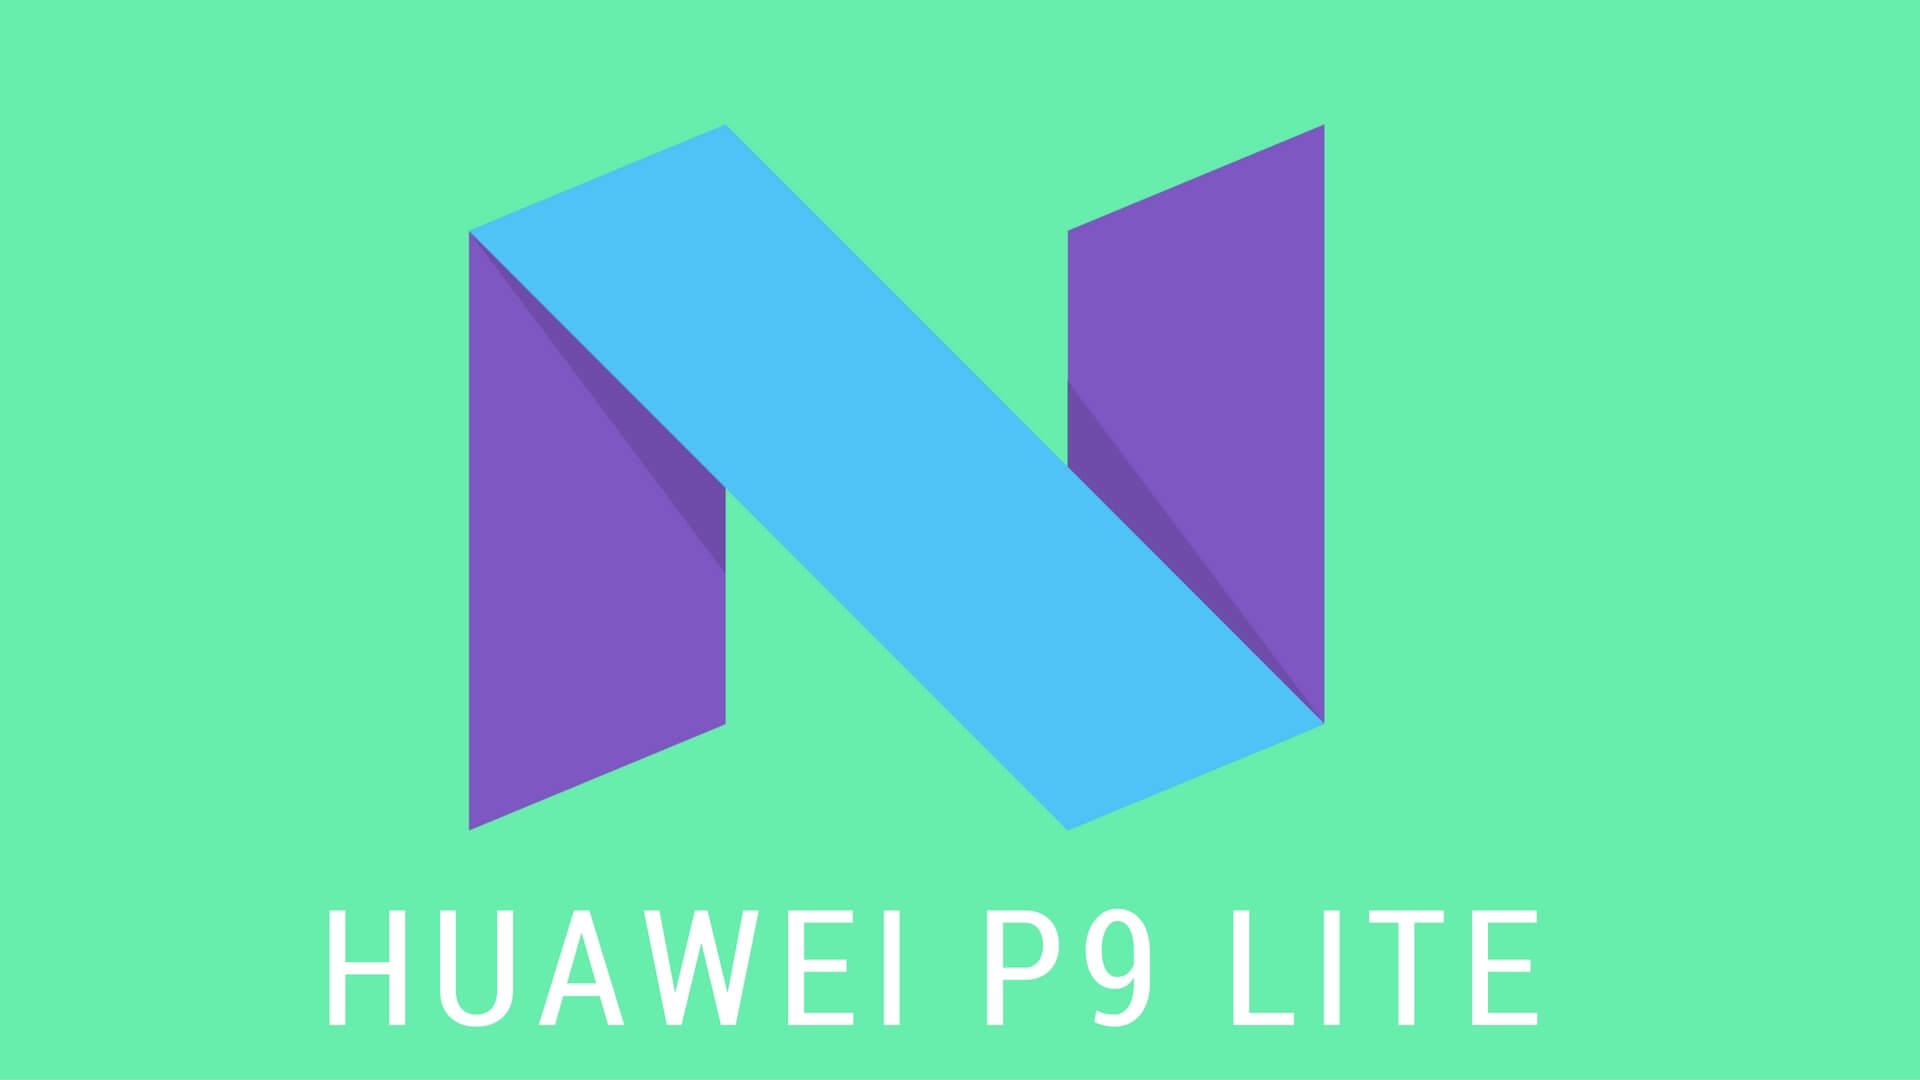 Huawei P9 Lite Android 7.0 Nougat Update Firmware & Installation